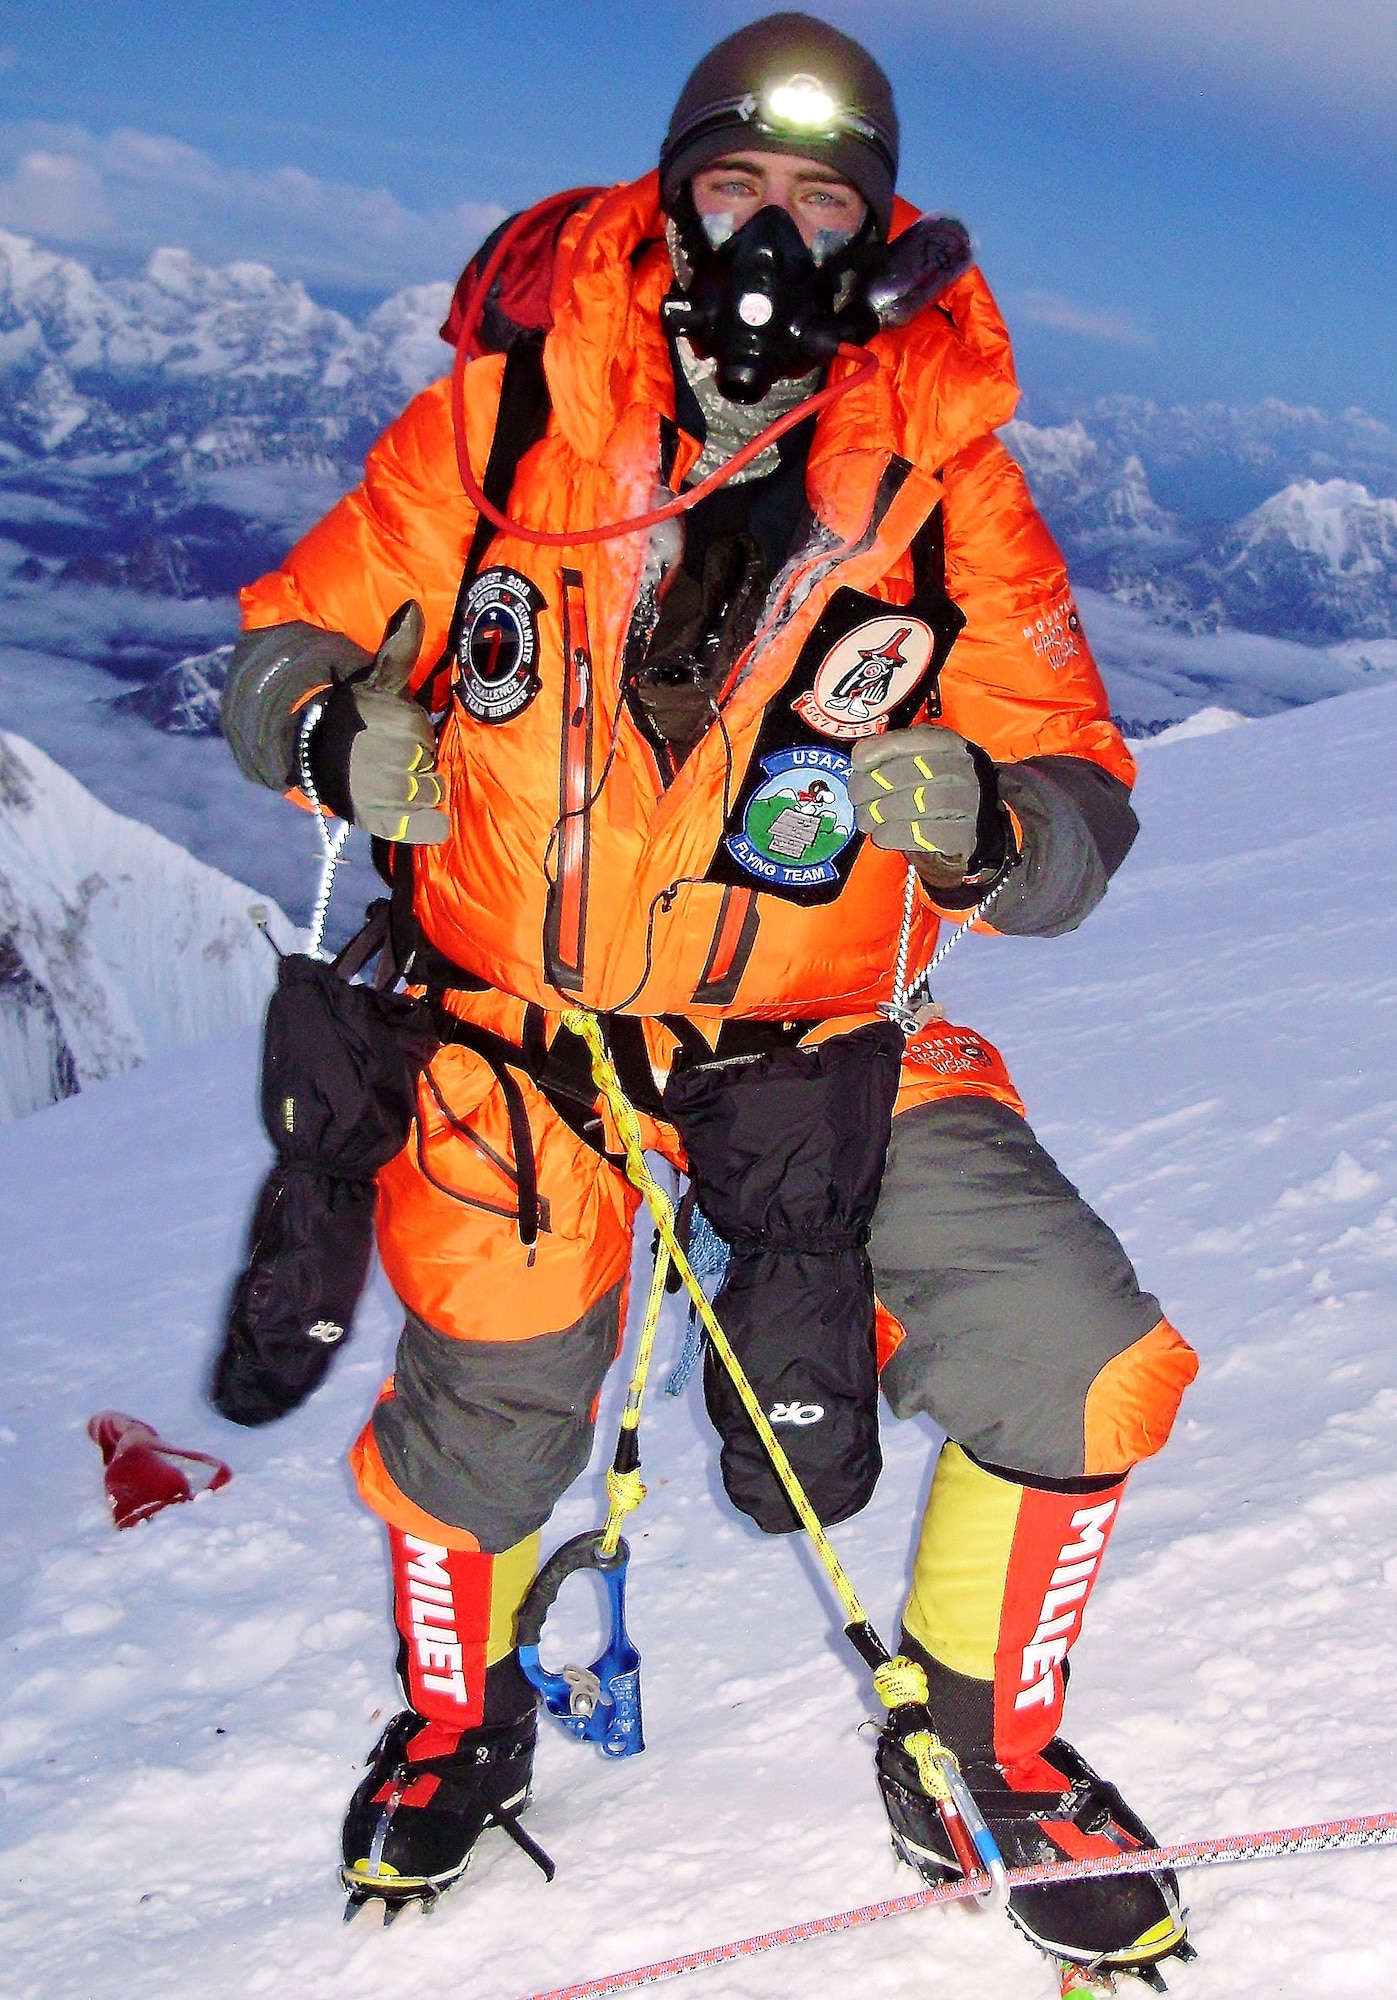 Capt. Marshall Klitzke gives a thumbs up at the top of Mount Everest, Nepal, in May 2013. Everest is the tallest mountain on Earth, standing 29,029 feet above sea level. Klitzke is an instructor pilot with the 557th Flying Training Squadron at the Air Force Academy in Colorado Springs, Colo., and an Academy graduate. (U.S. Air Force photo)